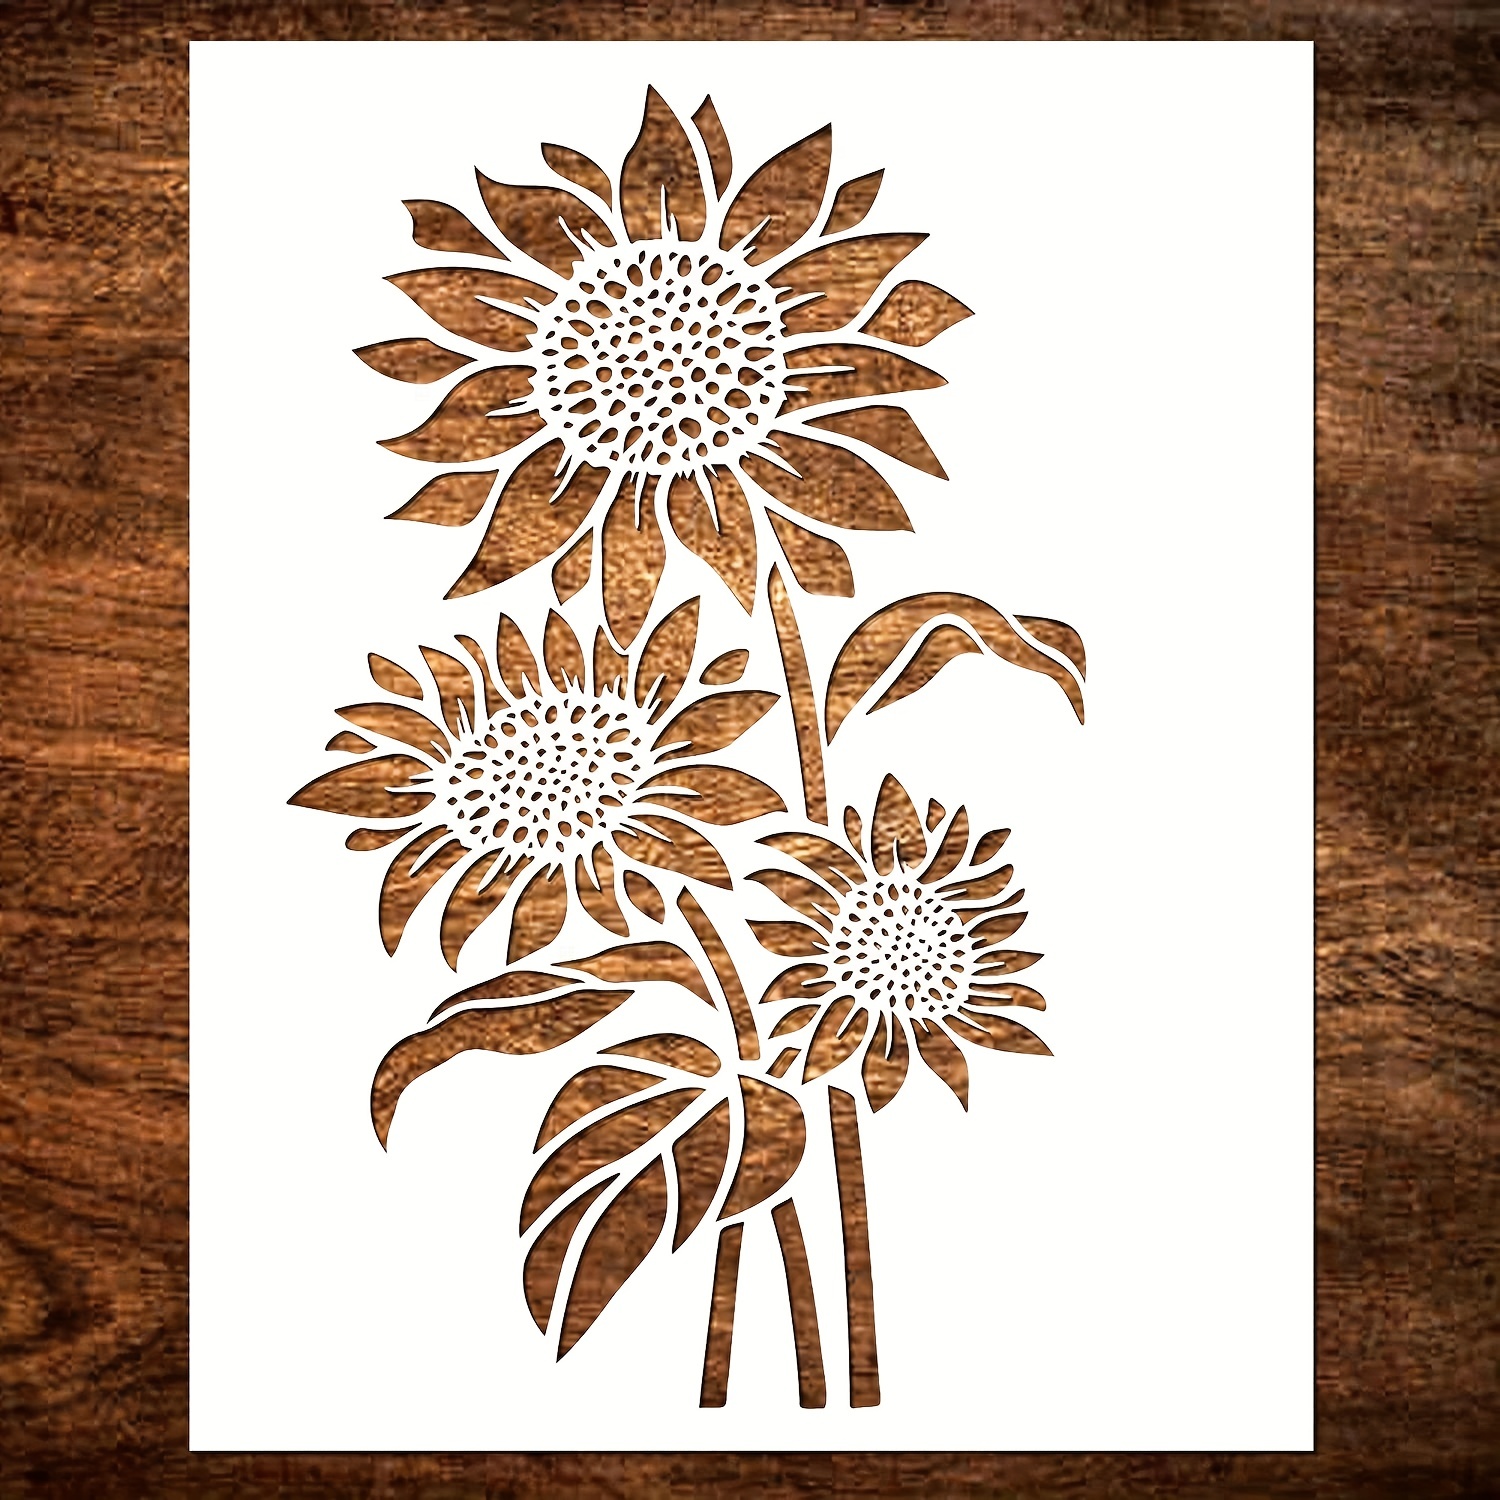 

Large Sunflower Stencil (12x15 Inches) - Reusable Sun Flower Stencils For Painting On Wood, Canvas, Paper, Fabric, Wall, Furniture - Diy Template For Art And Crafts